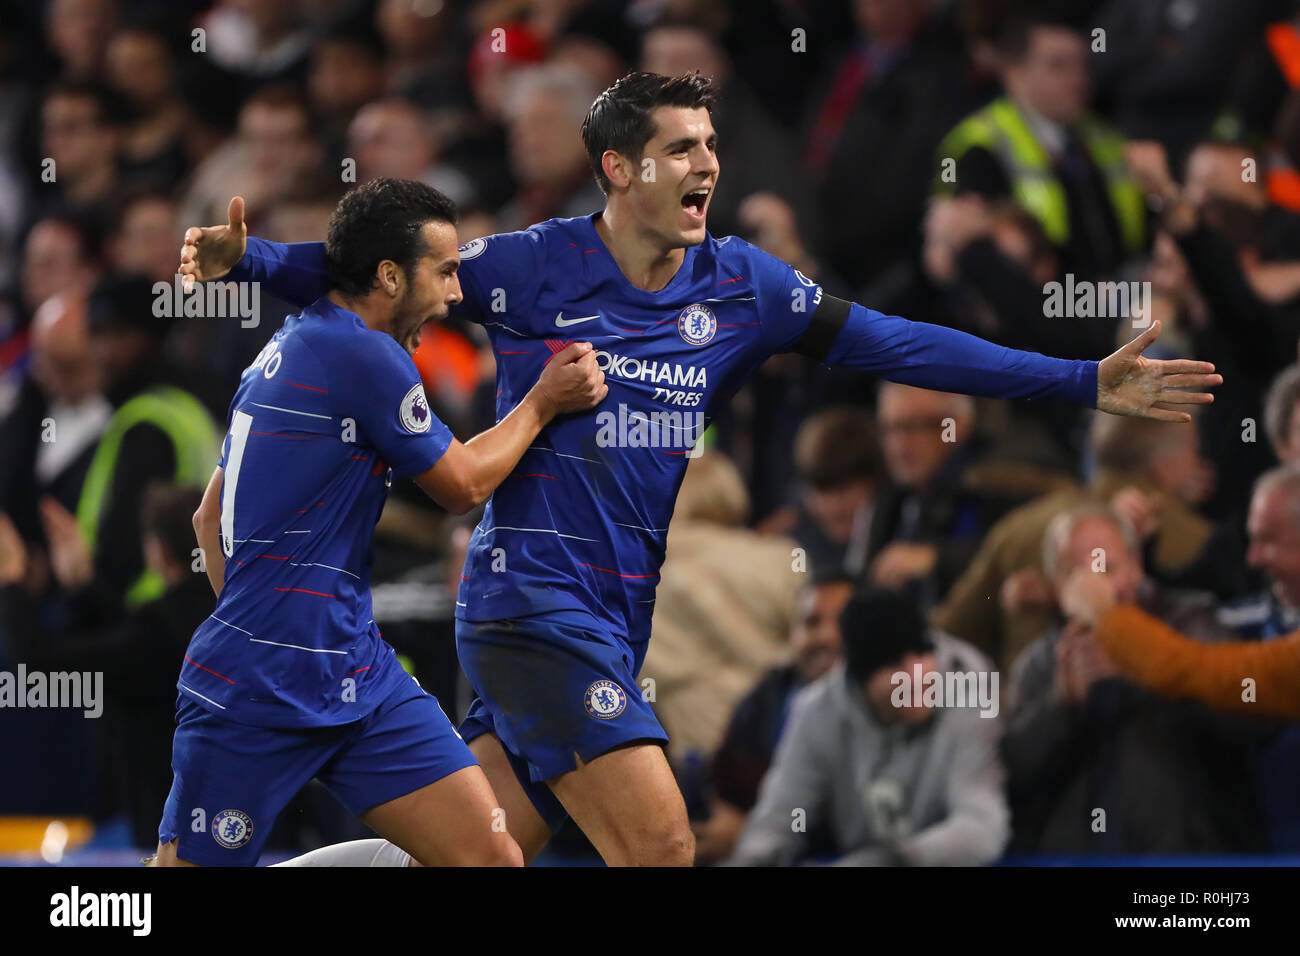 Alvaro Morata of Chelsea celebrates after scoring the opening goal, putting Chelsea 1-0 ahead  - Chelsea v Crystal Palace, Premier League, Stamford Bridge, London - 4th November 2018  STRICTLY EDITORIAL USE ONLY - DataCo rules apply - The use of this image in a commercial context is strictly prohibited unless express permission has been given by the club(s) concerned. Examples of commercial usage include, but are not limited to, use in betting and gaming, marketing and advertising products. No use with unauthorised audio, video, data, fixture lists, club and or league logos or services includi Stock Photo